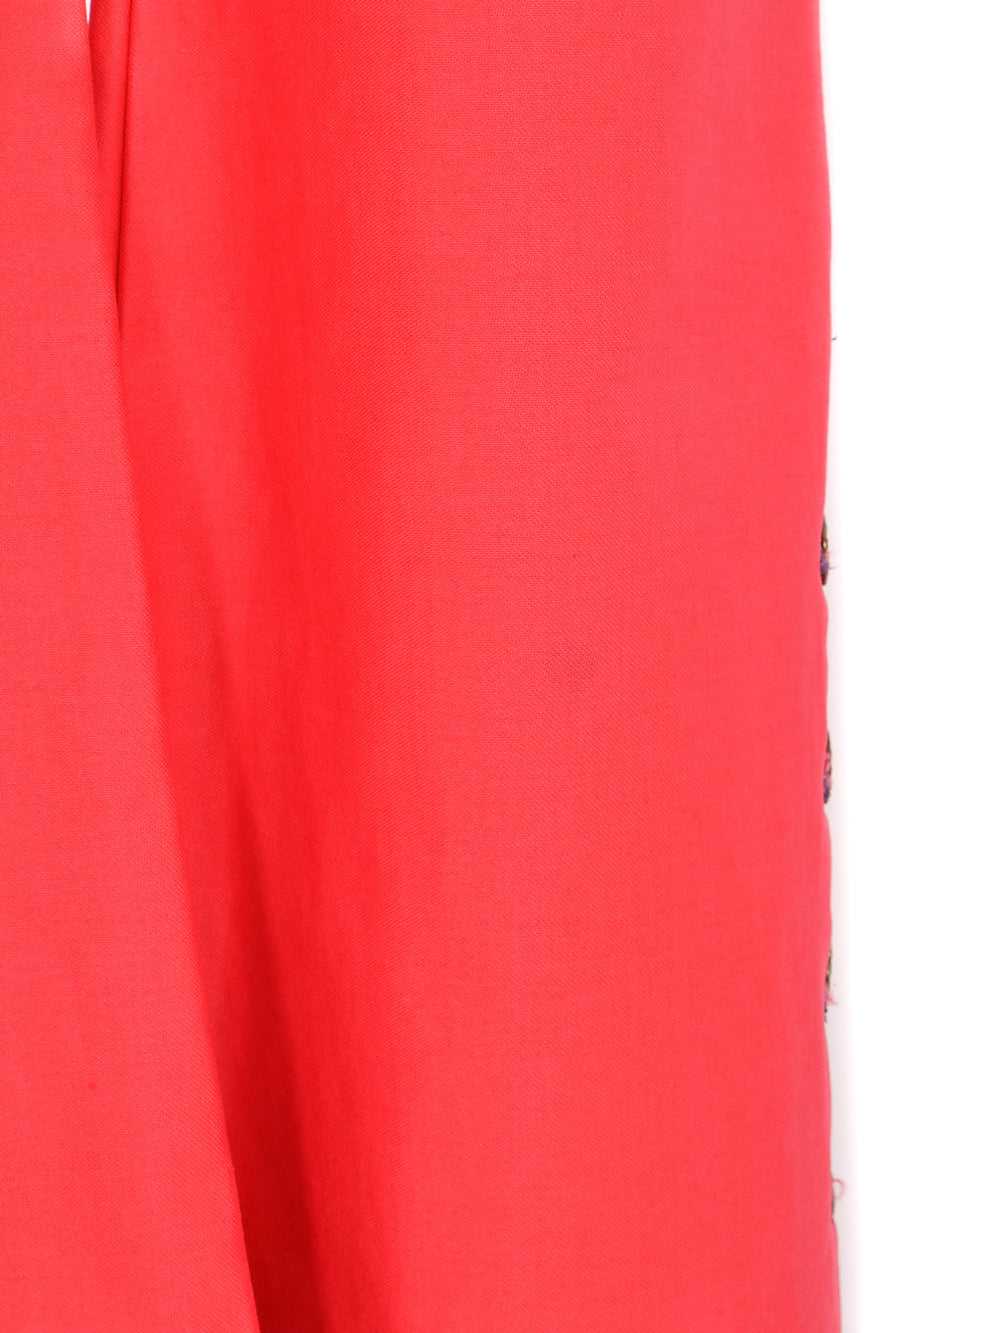 1970's Red Contrast Stitch Flares - image 5